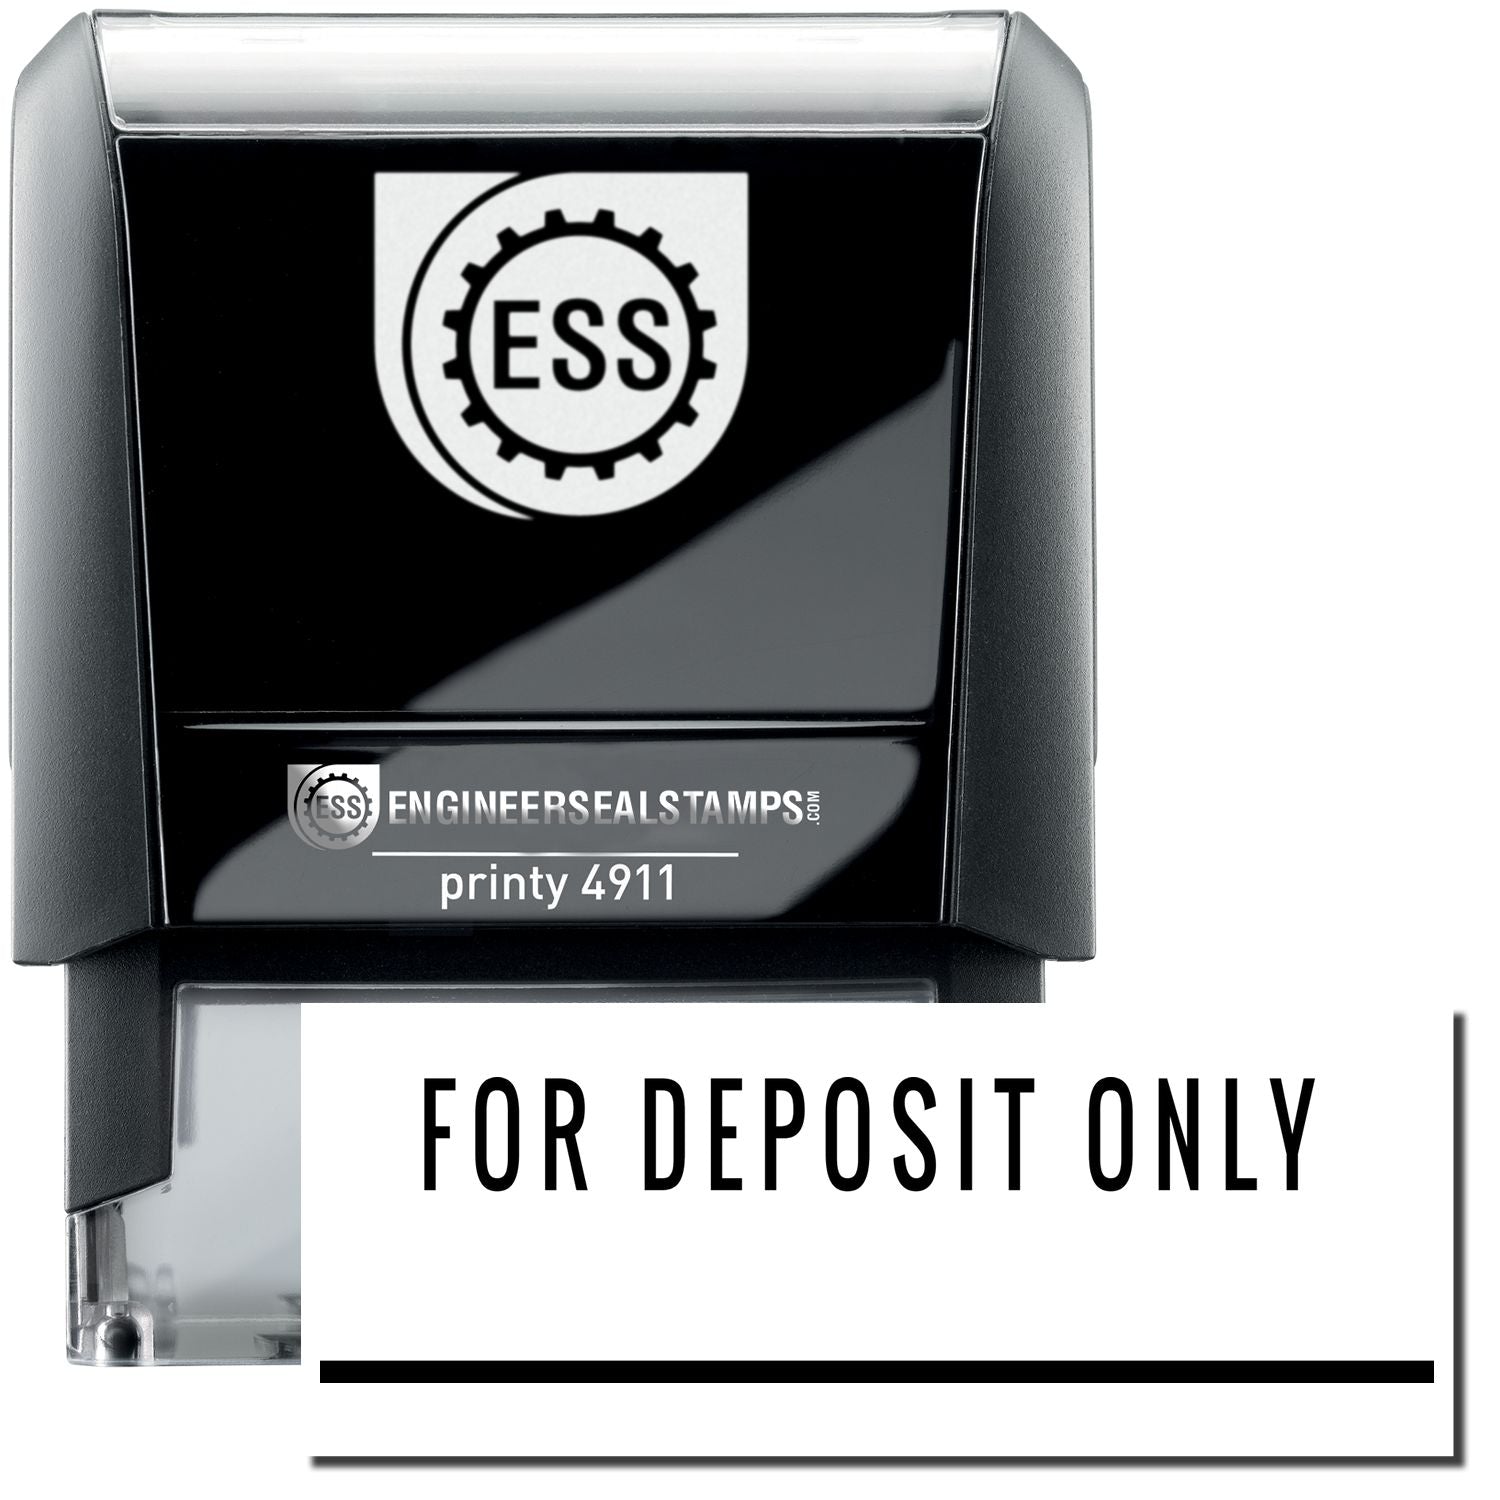 A self-inking stamp with a stamped image showing how the text "FOR DEPOSIT ONLY" with a line below the text is displayed after stamping.